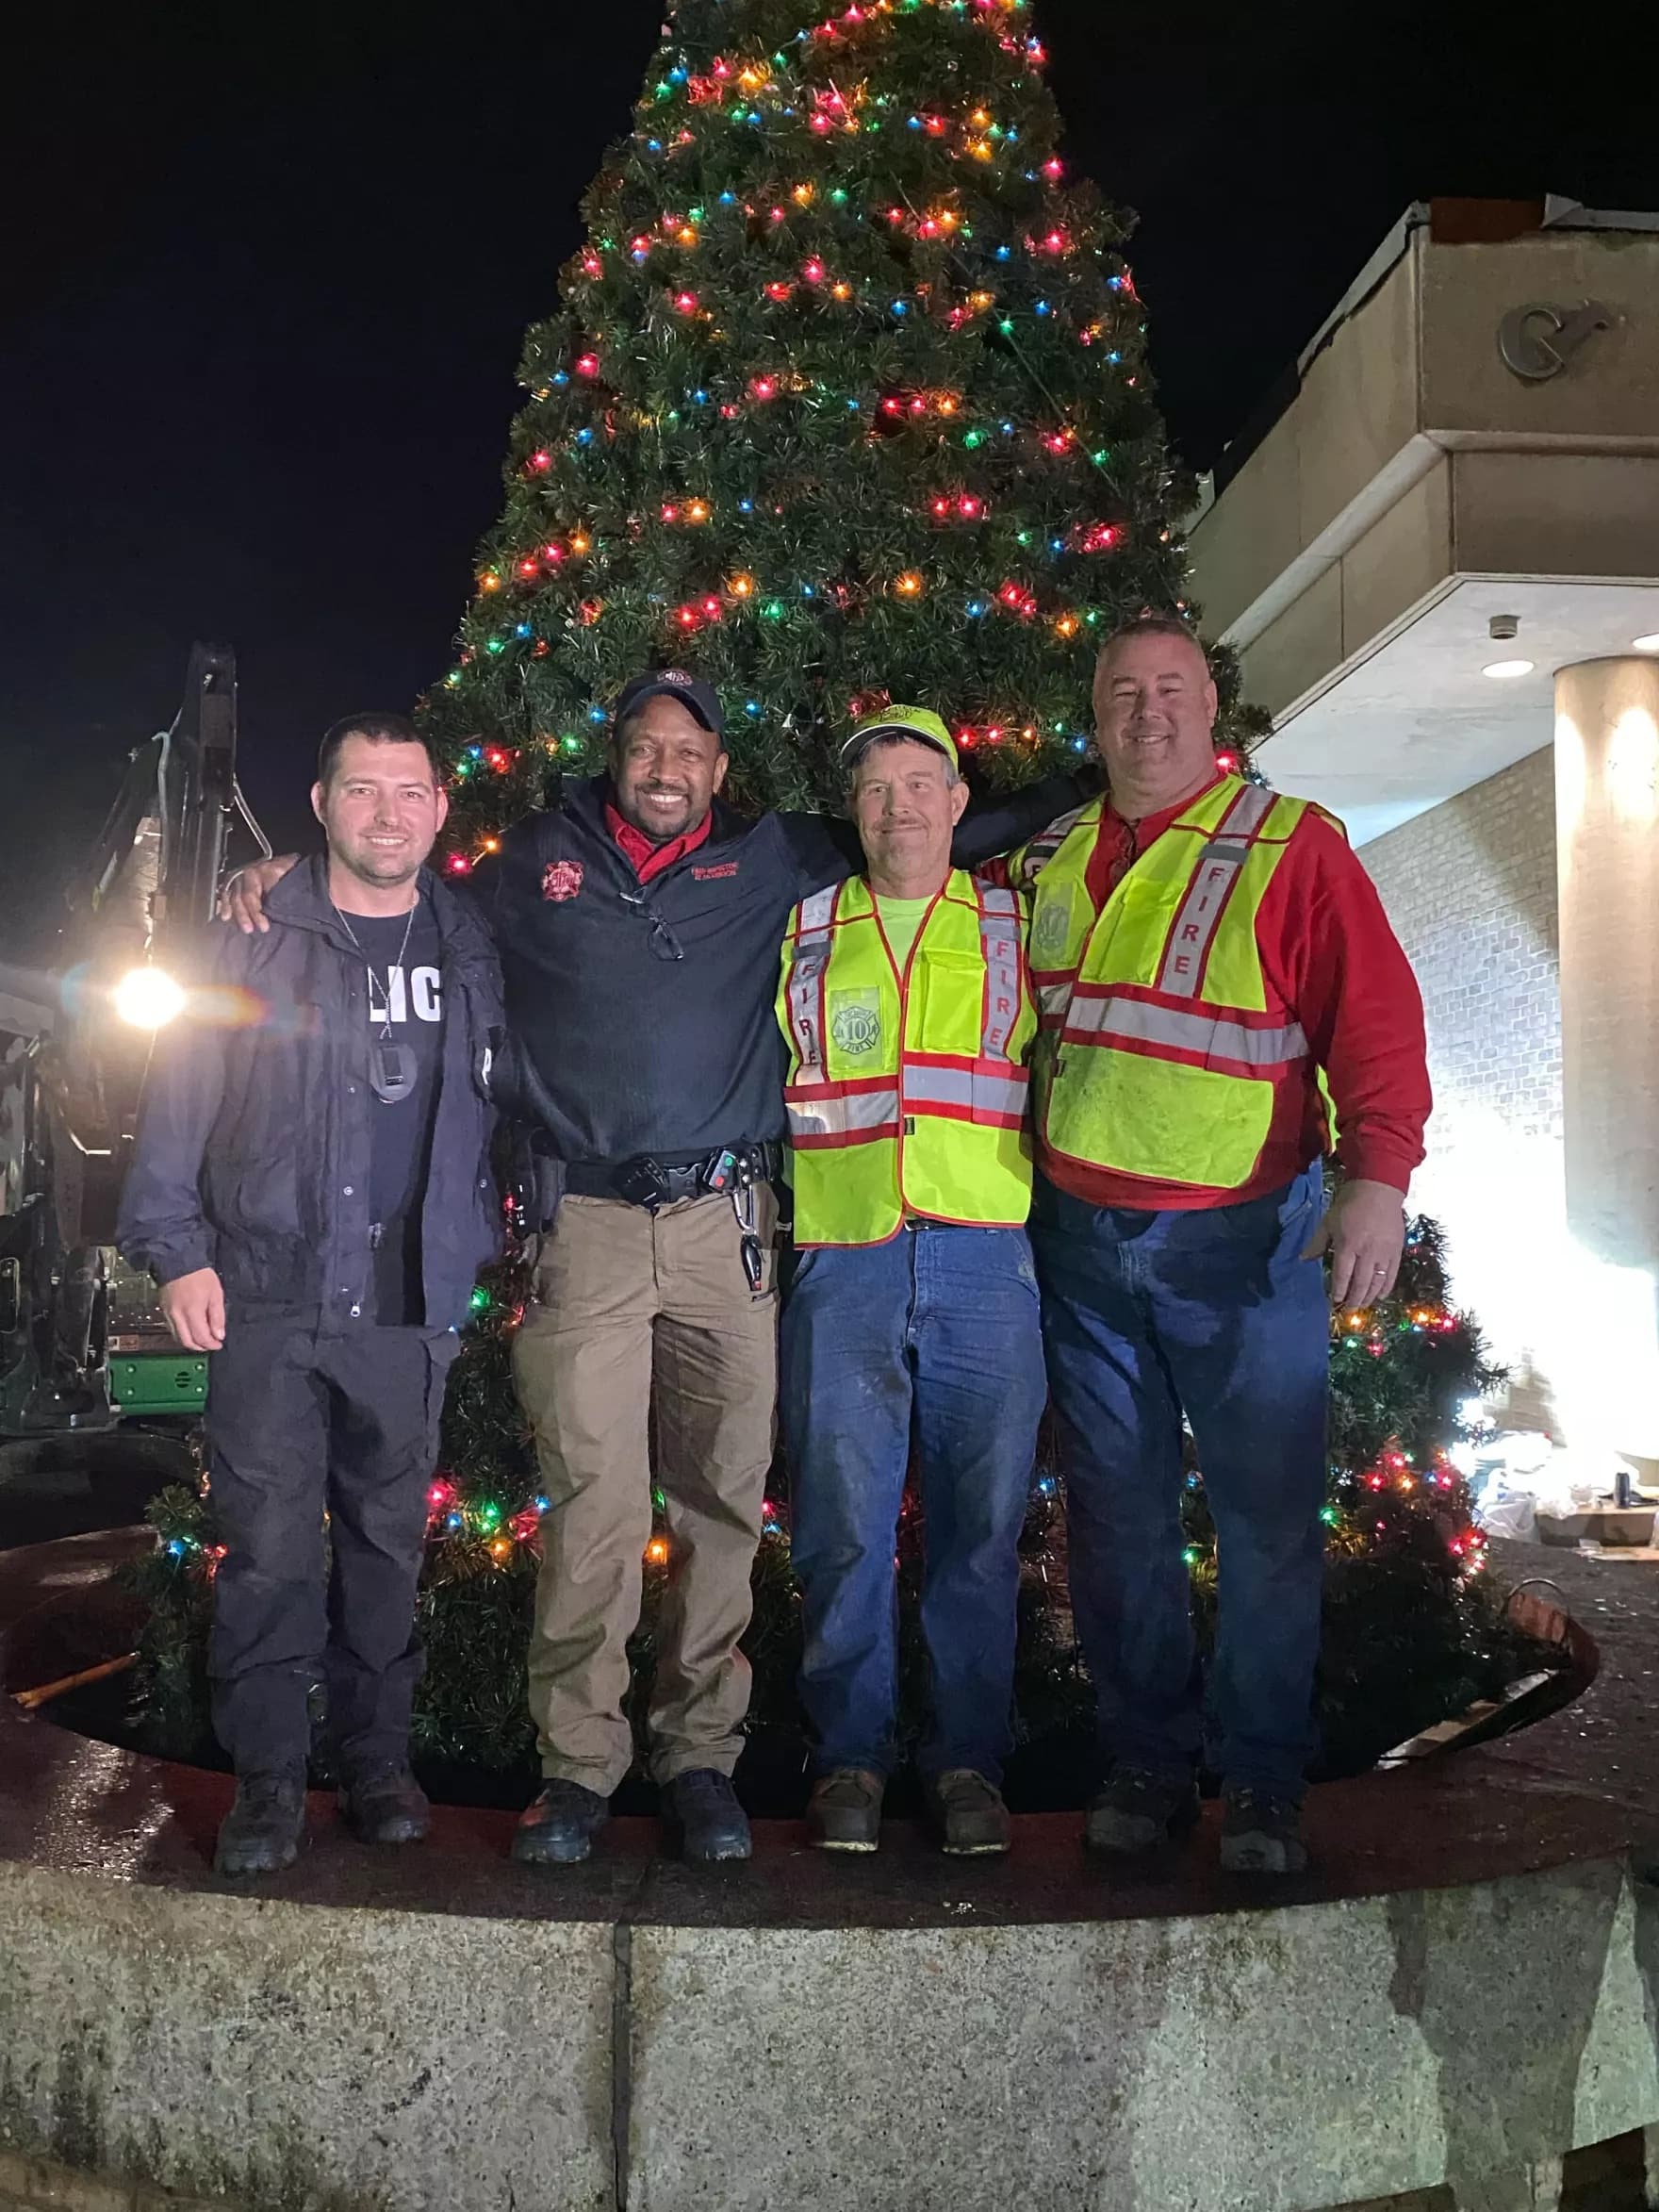 Mayfield’s community Christmas tree, rescued from tornado debris